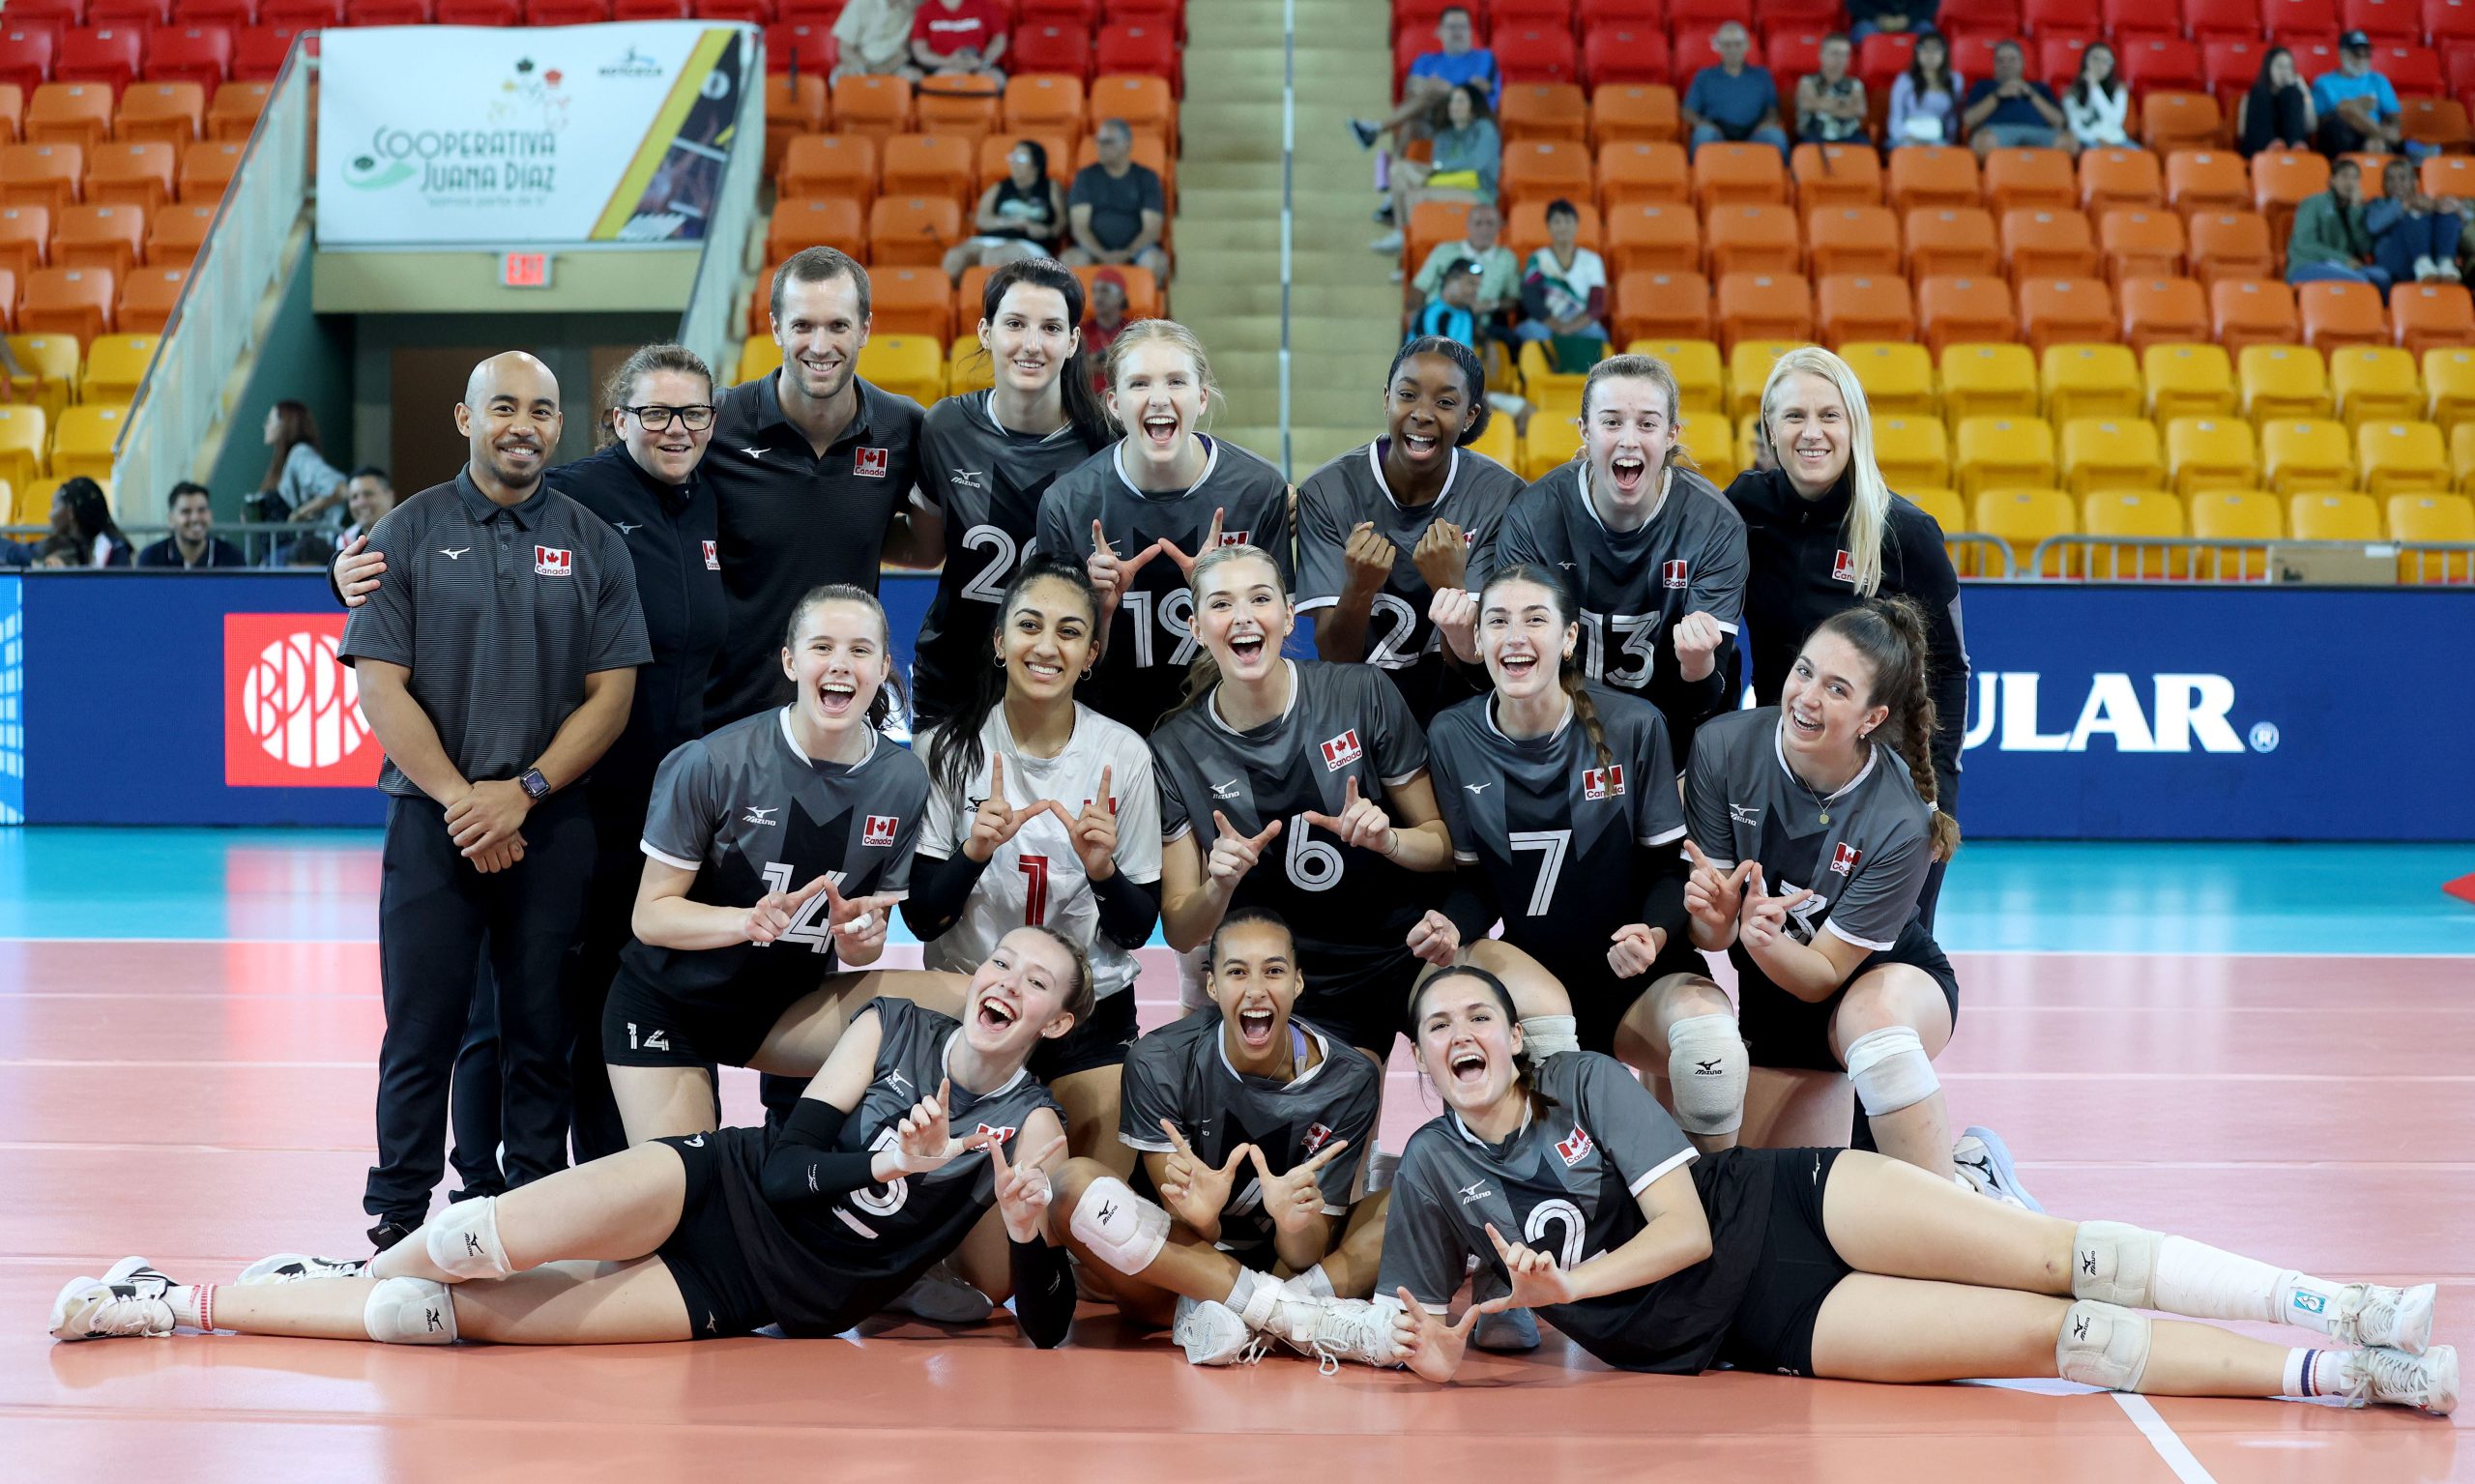 Canada will face Dominican Republic for fifth place